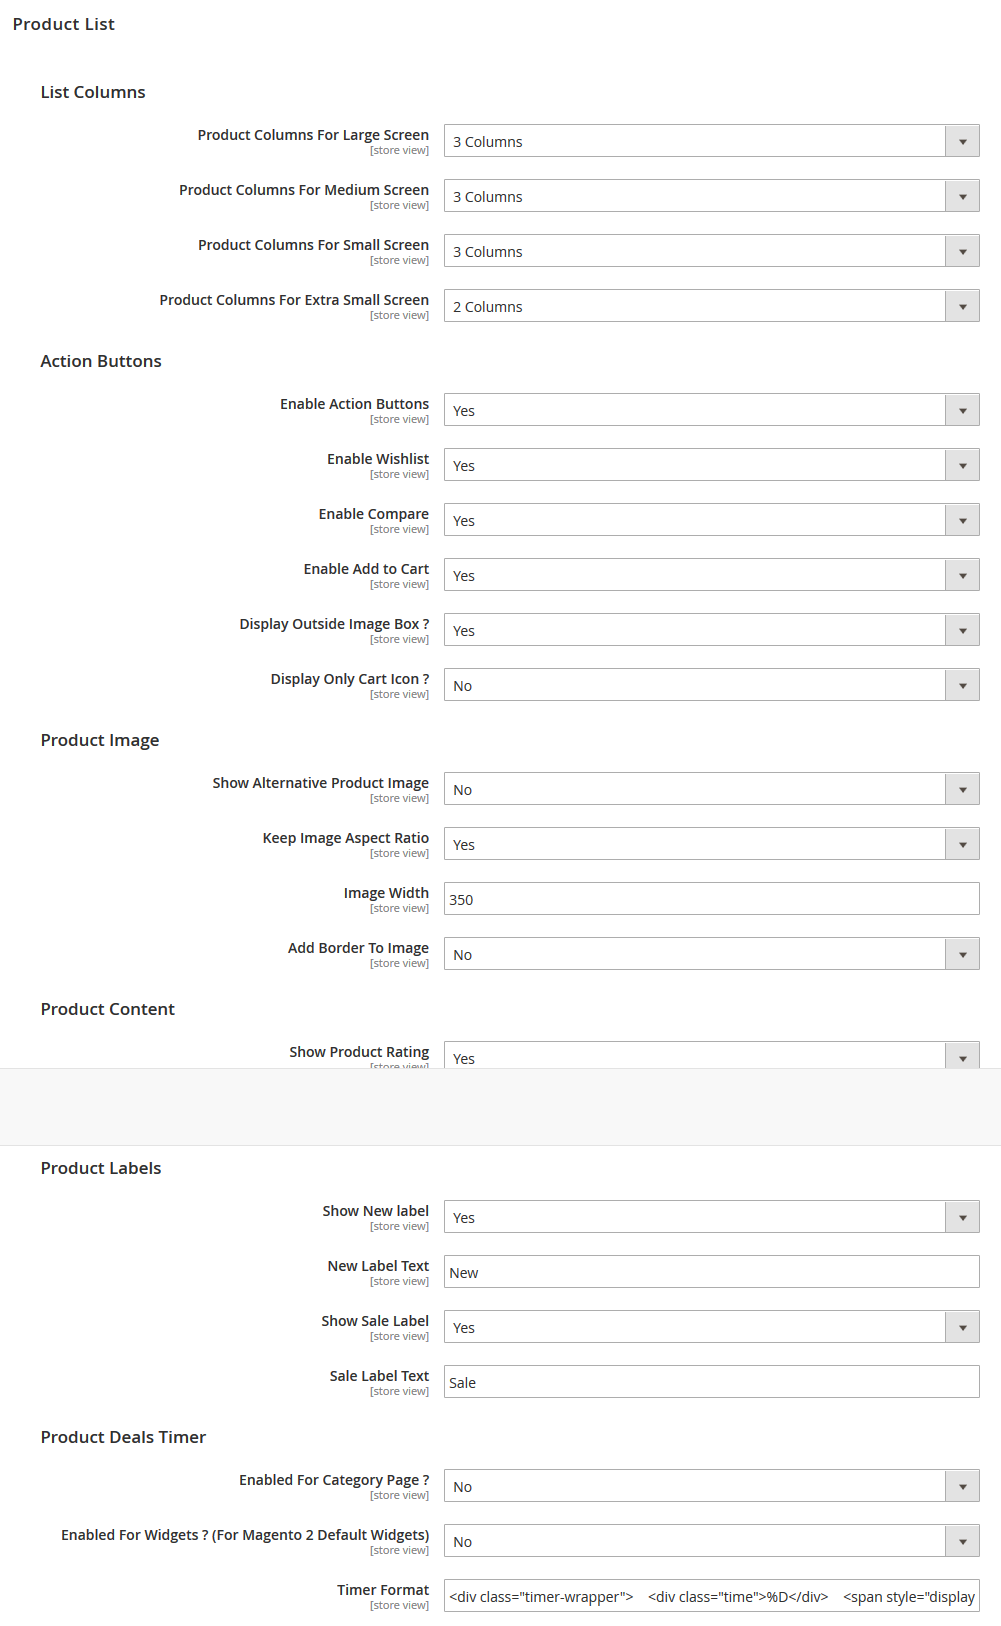 Unlimited - Category Page Configuration